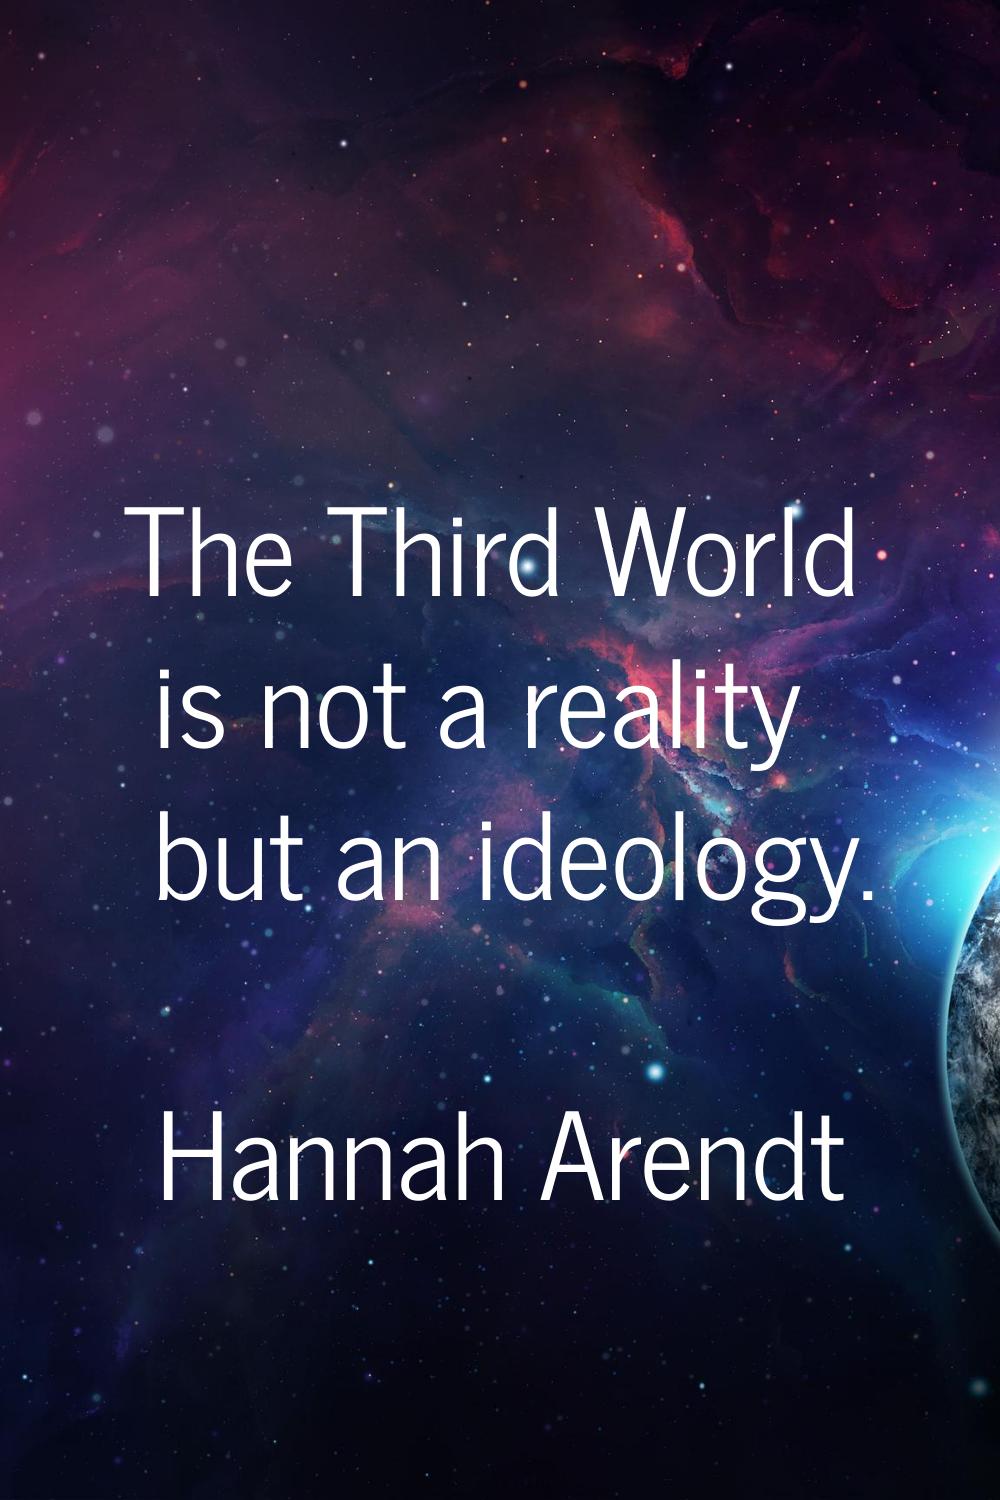 The Third World is not a reality but an ideology.